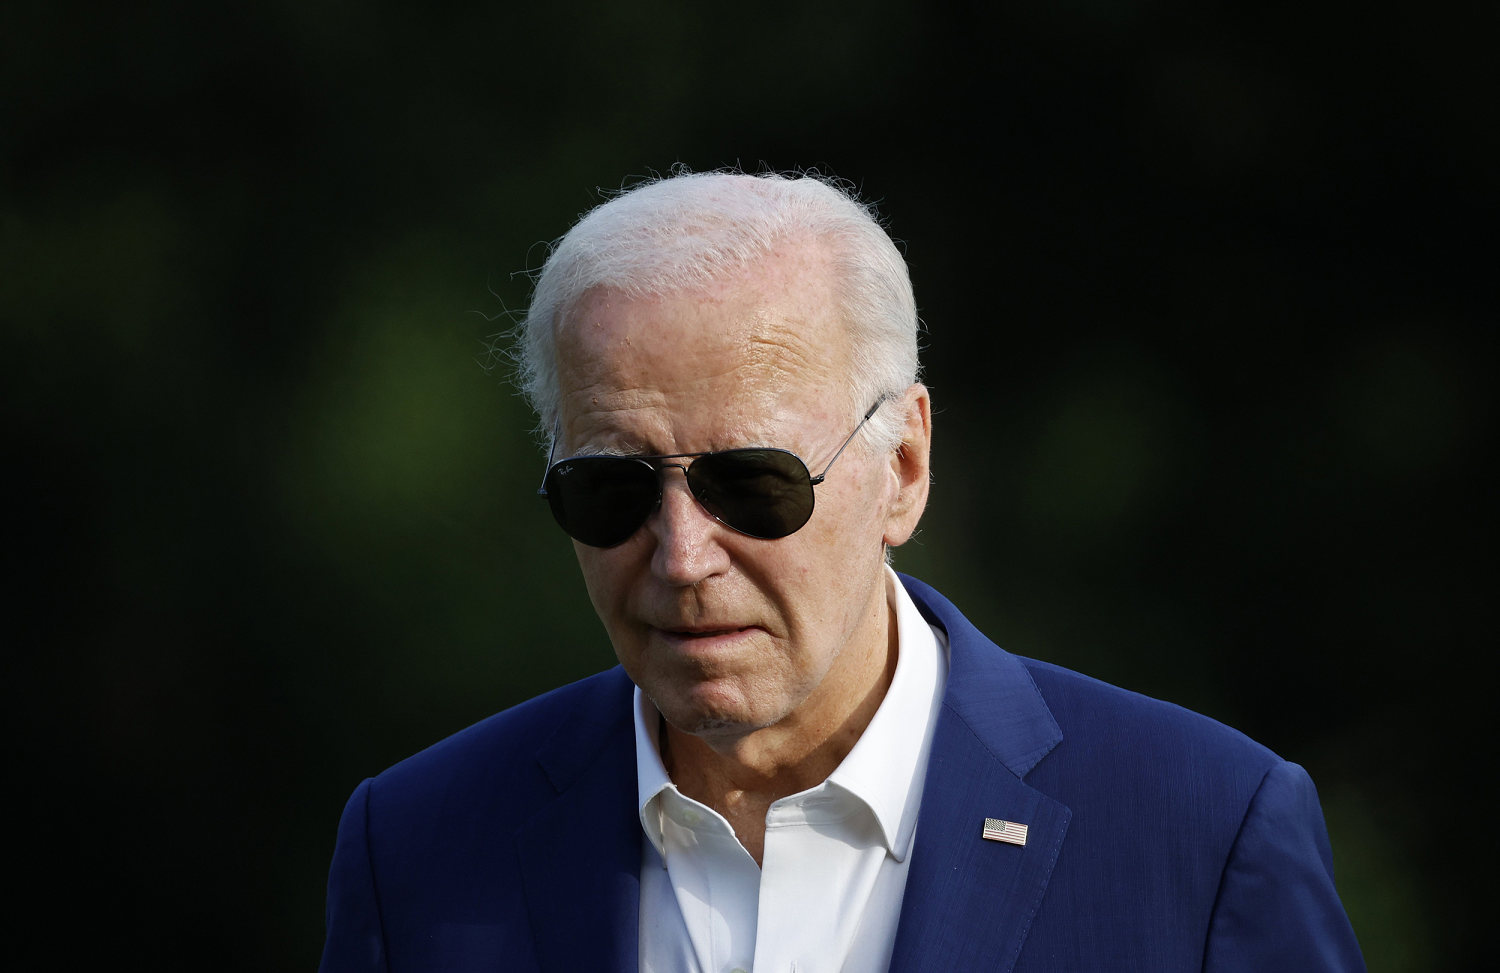 Biden’s post-debate strategy falters, more Dems call for a change